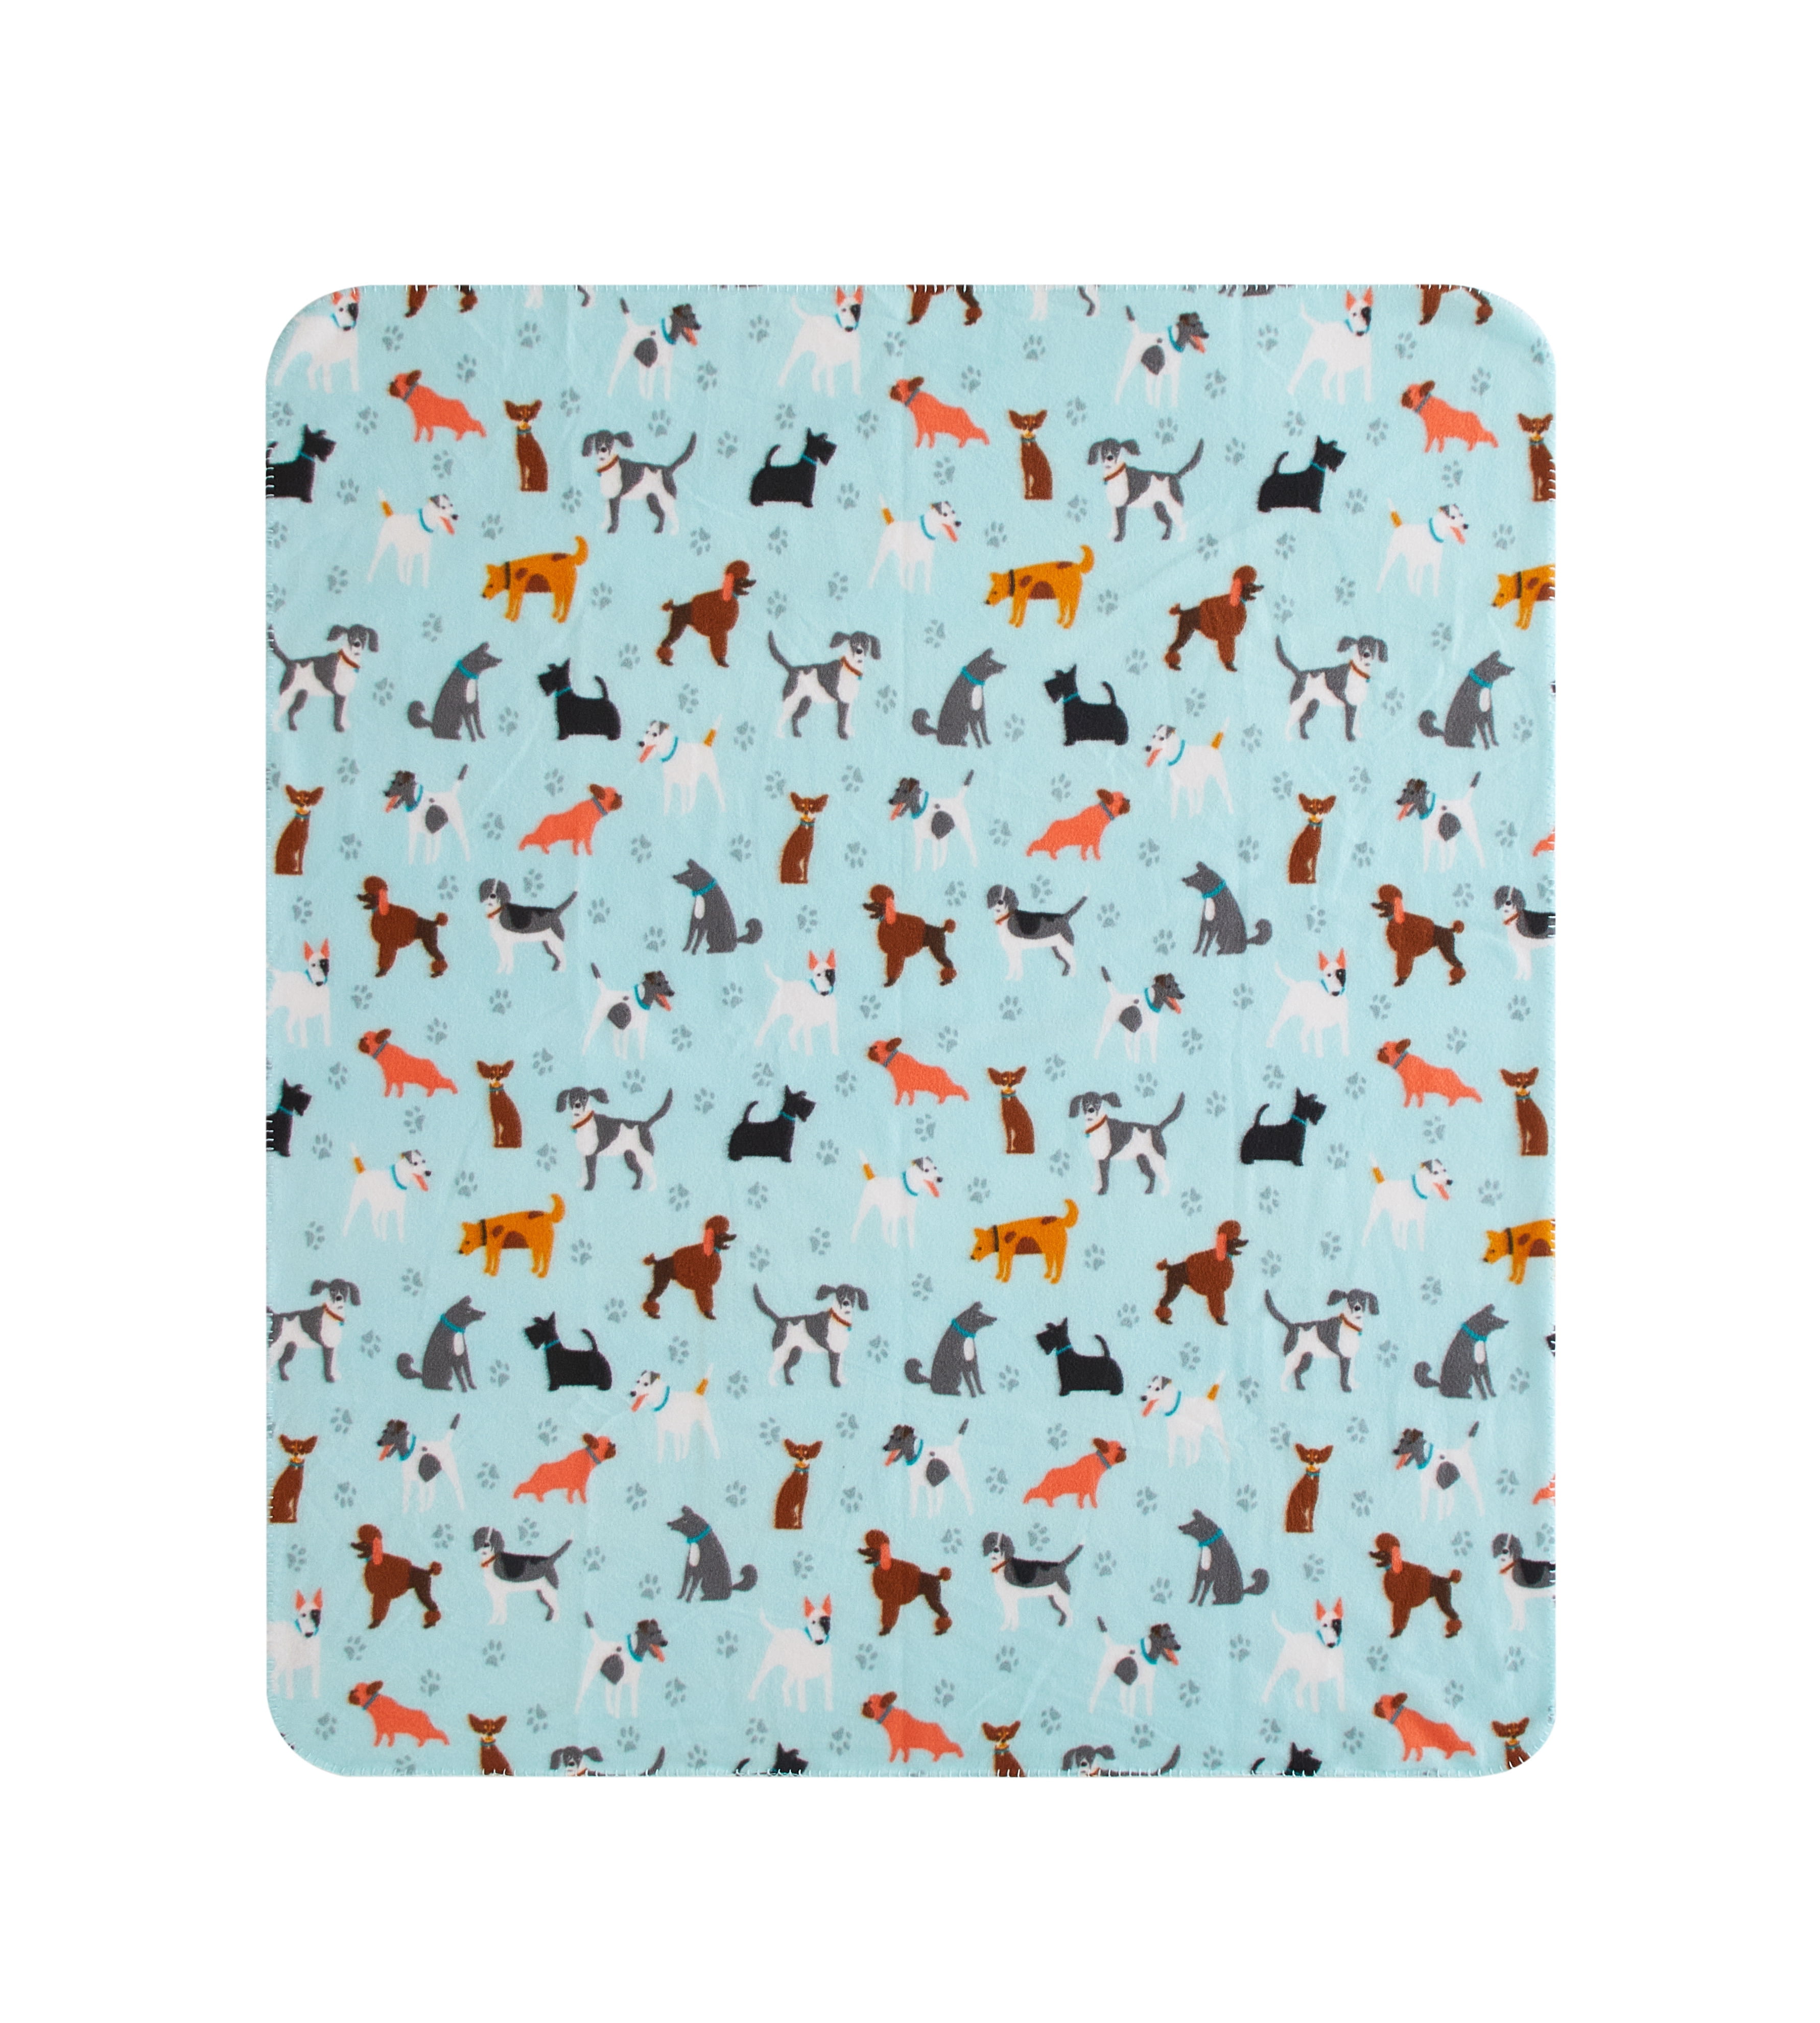 Mainstays Cozy Fleece Throw Blanket, 50" x 60" Inches, Blue Dogs